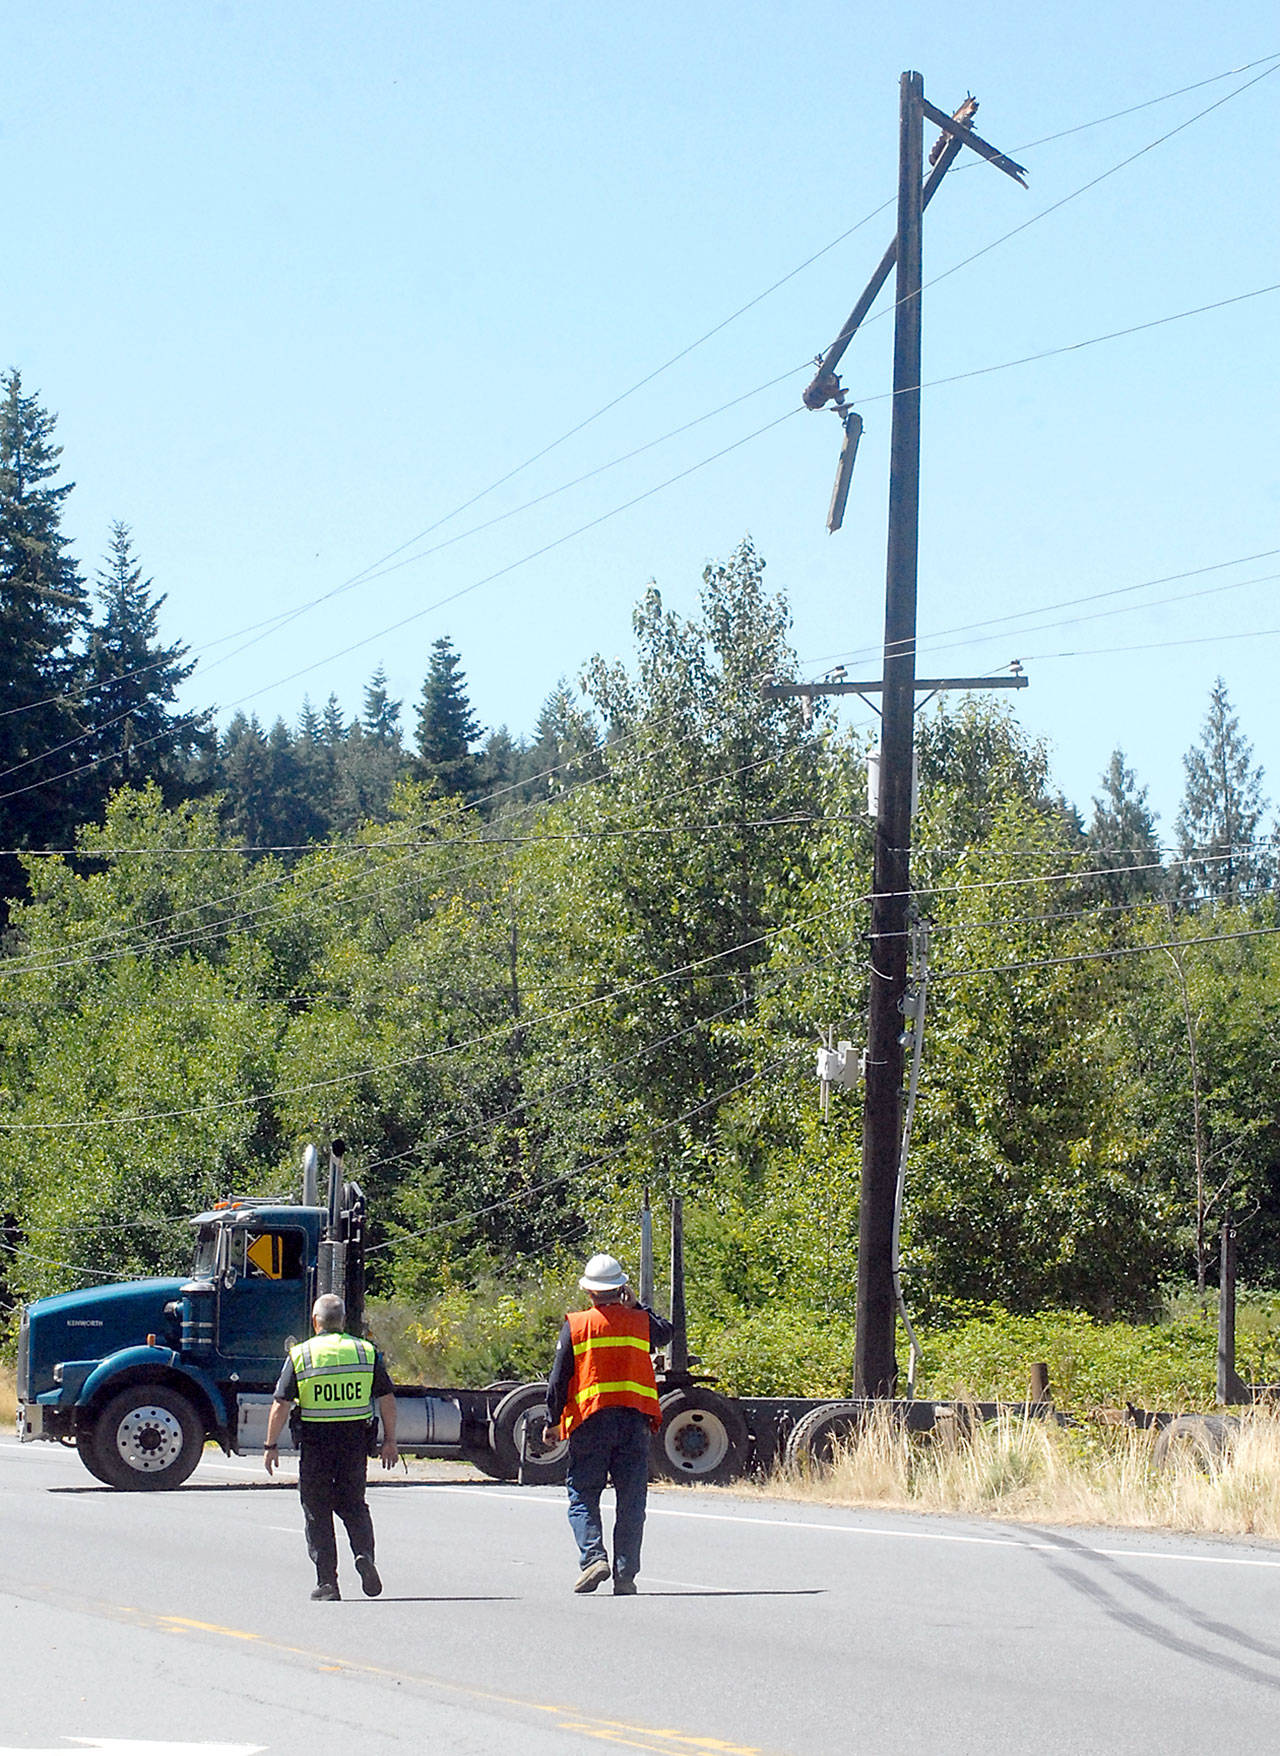 Port Angeles police and Clallam County Public Utility District 1 representatives approach an unloaded log truck that slid into a utility pole, forcing the closure of U.S. Highway 101 between Airport Road and Bean Road in Port Angeles on Tuesday. Traffic was detoured onto Edgewood Drive for the duration of the incident. (Keith Thorpe/Peninsula Daily News)